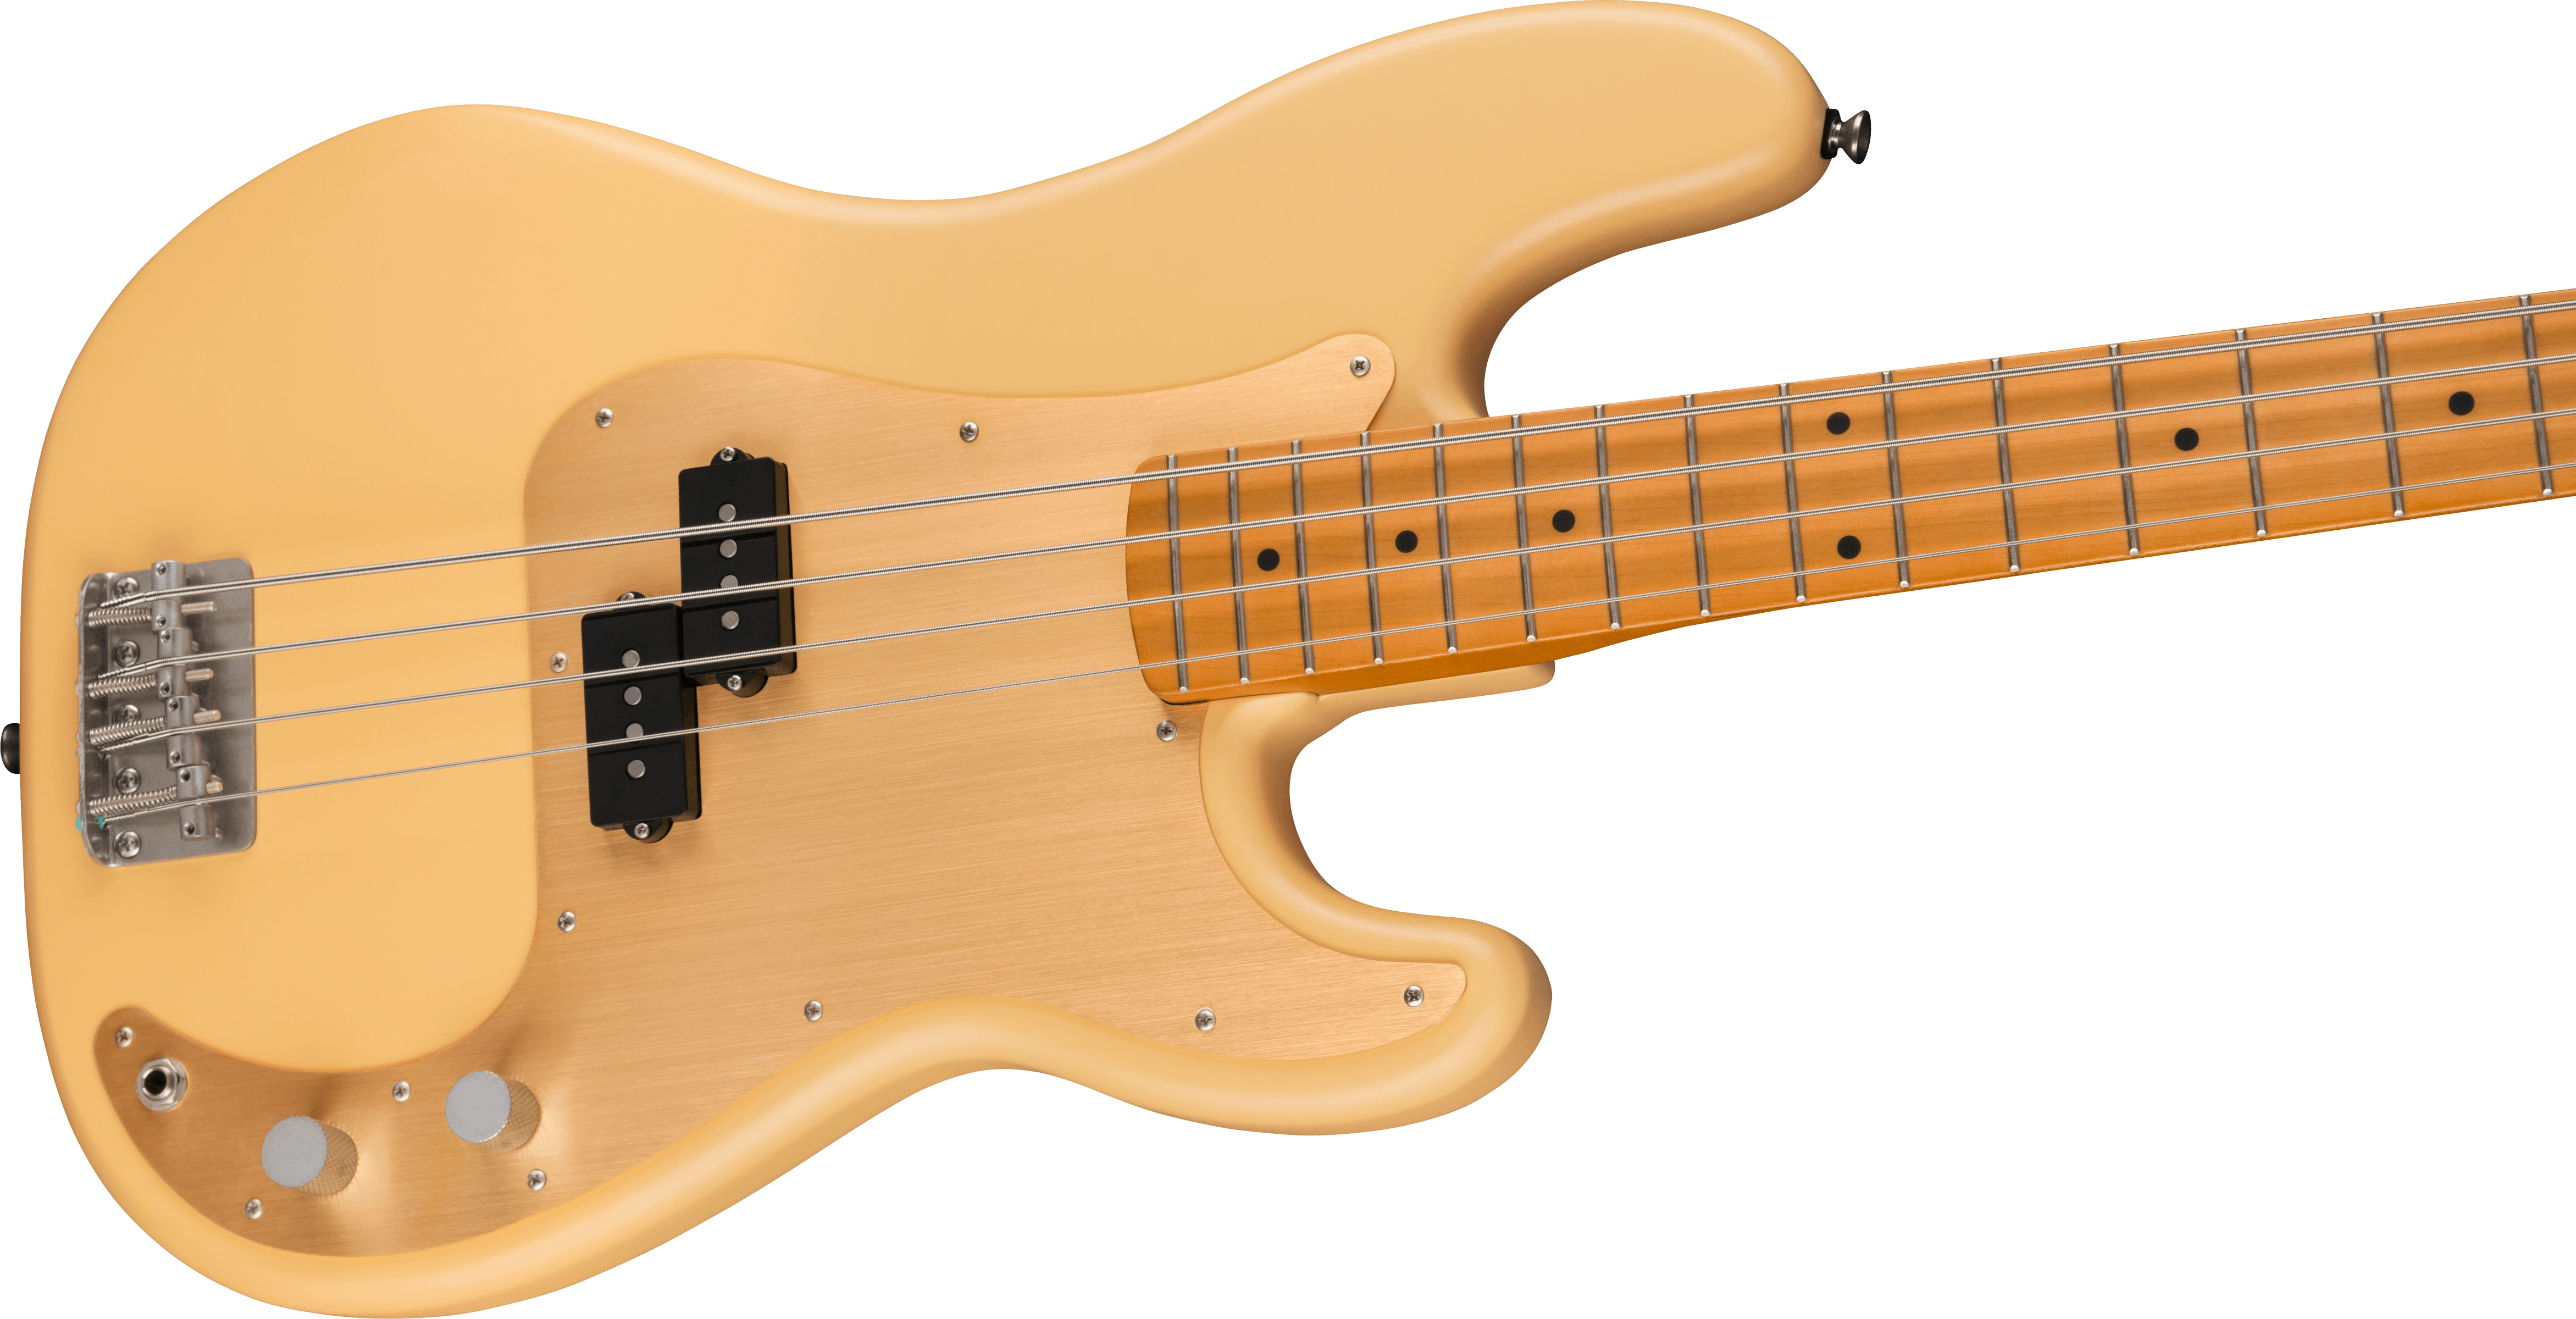 Squier Precision Bass 40th Anniversary Gold Edition Mn - Satin Vintage Blonde - Basse Électrique Solid Body - Variation 3